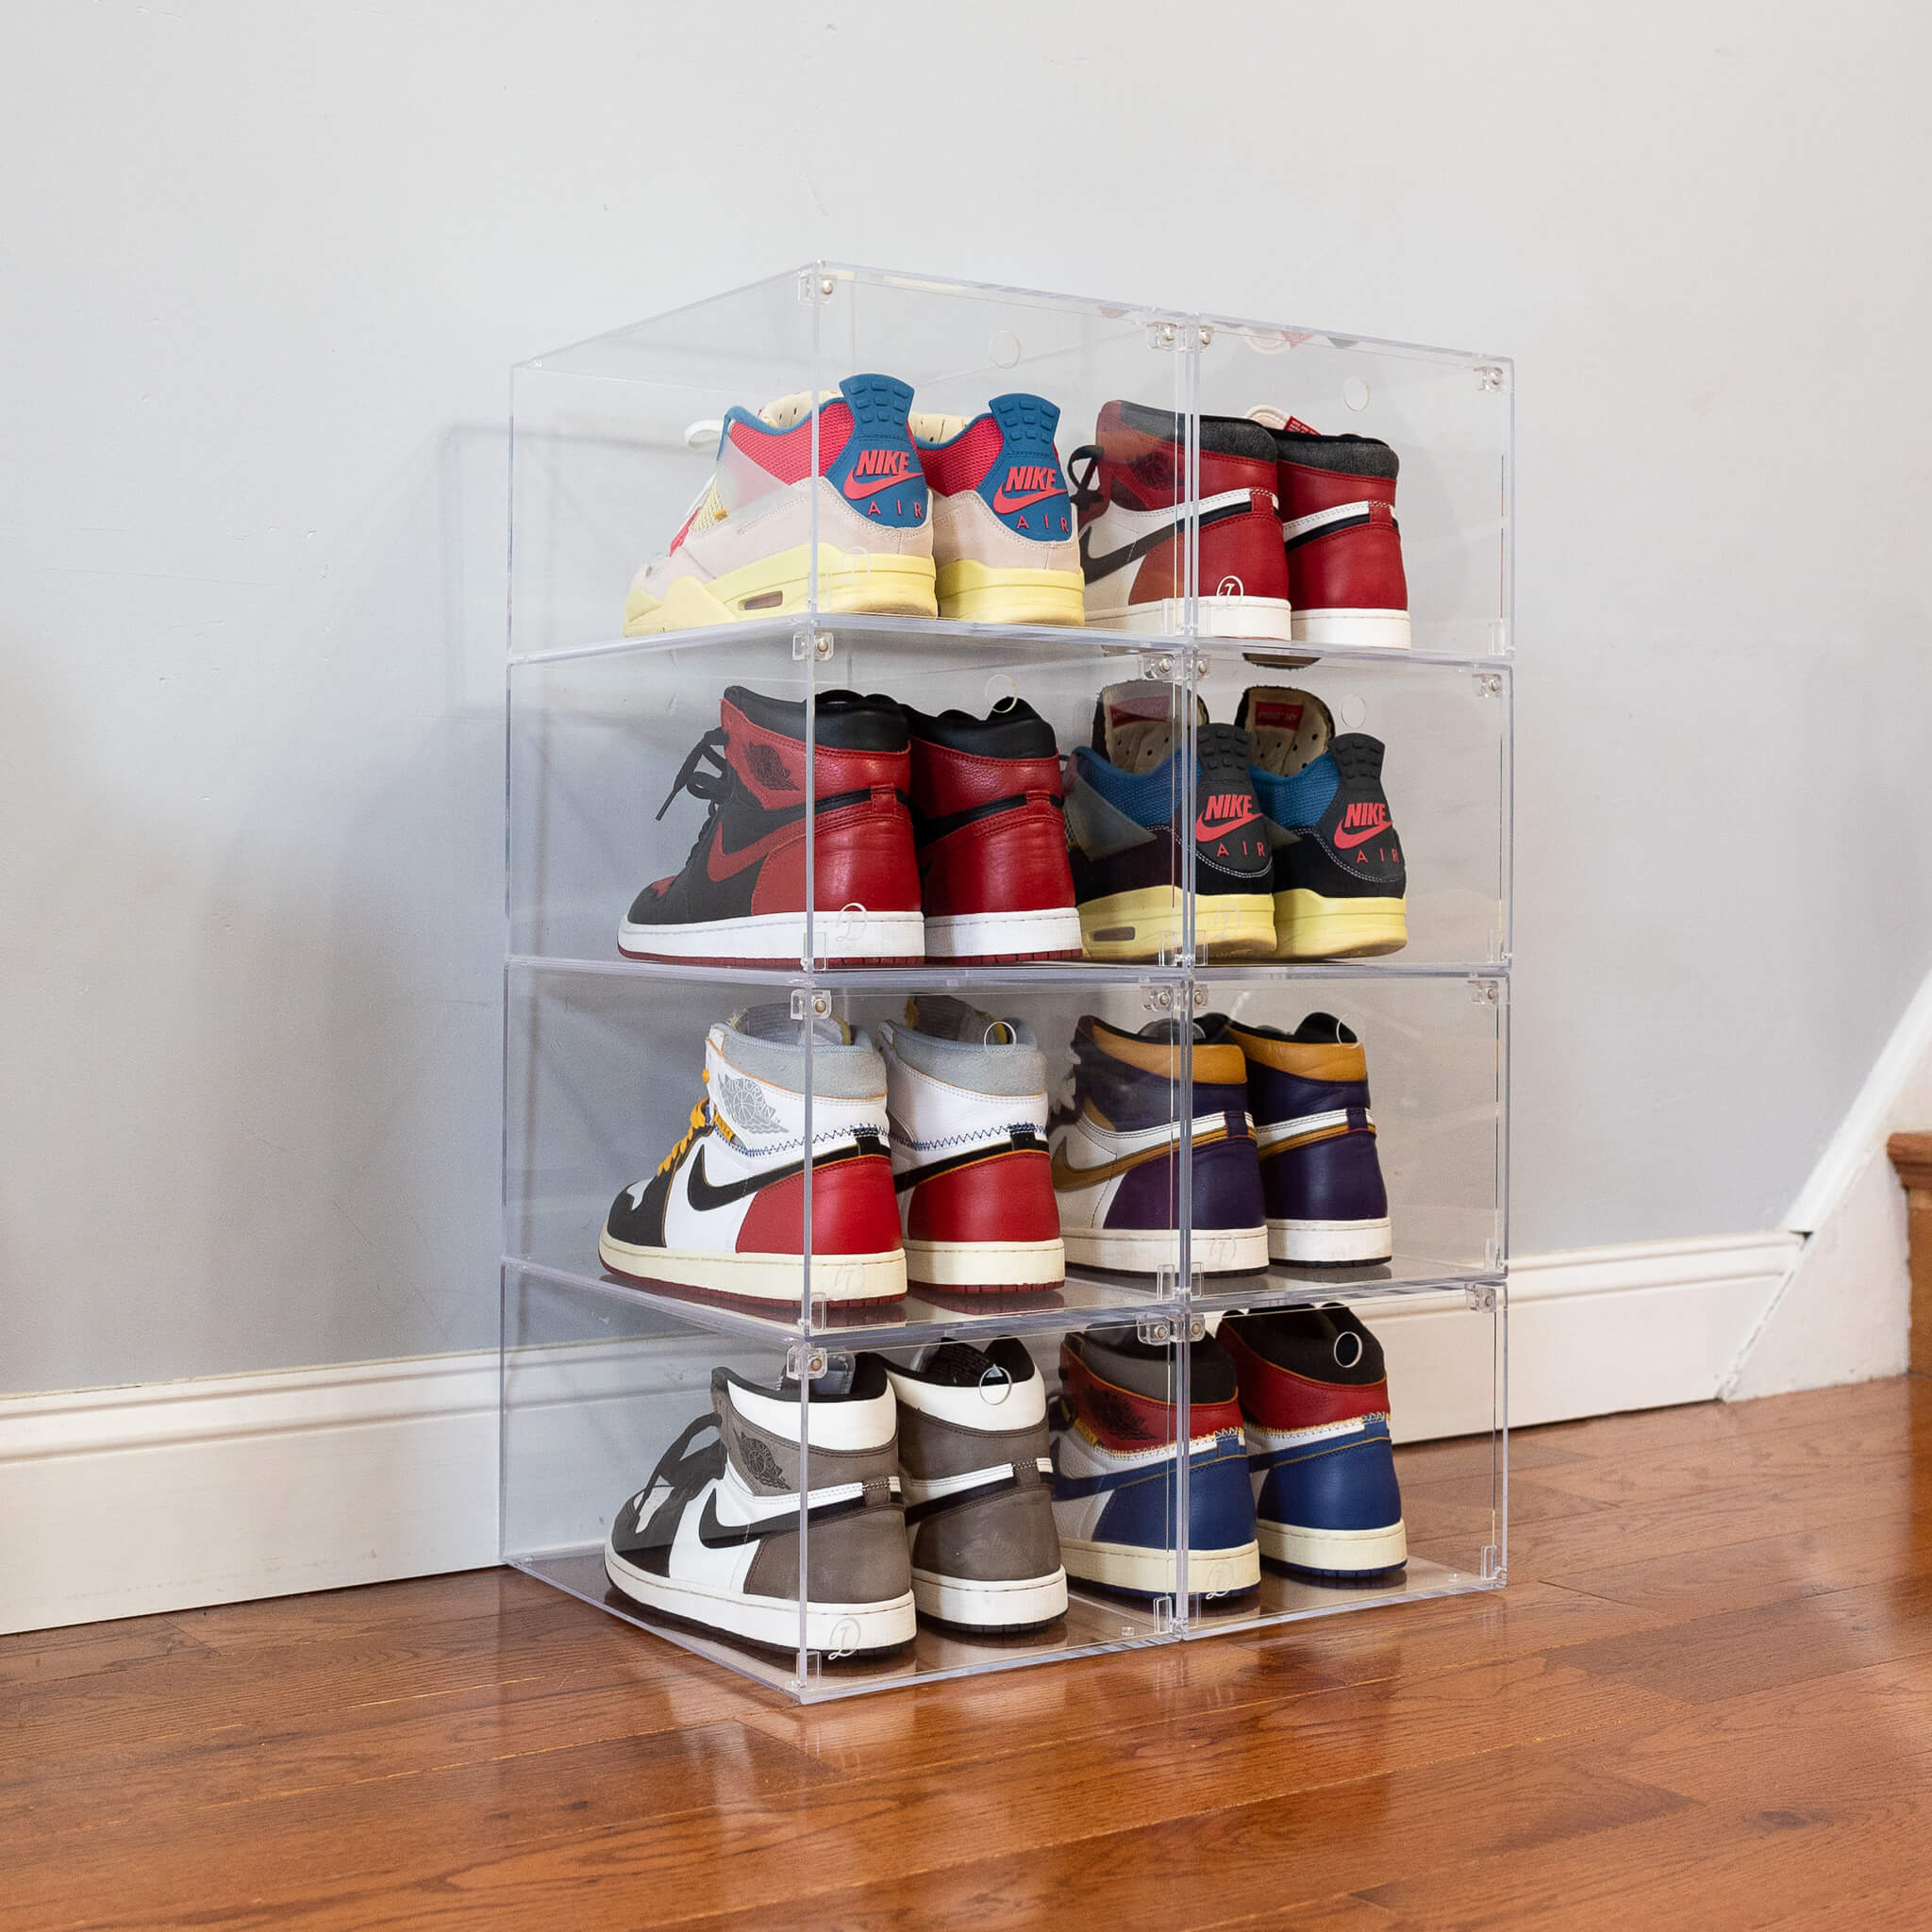 Looksee Designs - Sneaker Display Case - Shoe Display Case - Acrylic Shoe Box - Storage For Sneakerheads - Shoe Cases - Sneaker Throne - Premium Acrylic Display - Shoe Collection - Acrylic Organizer